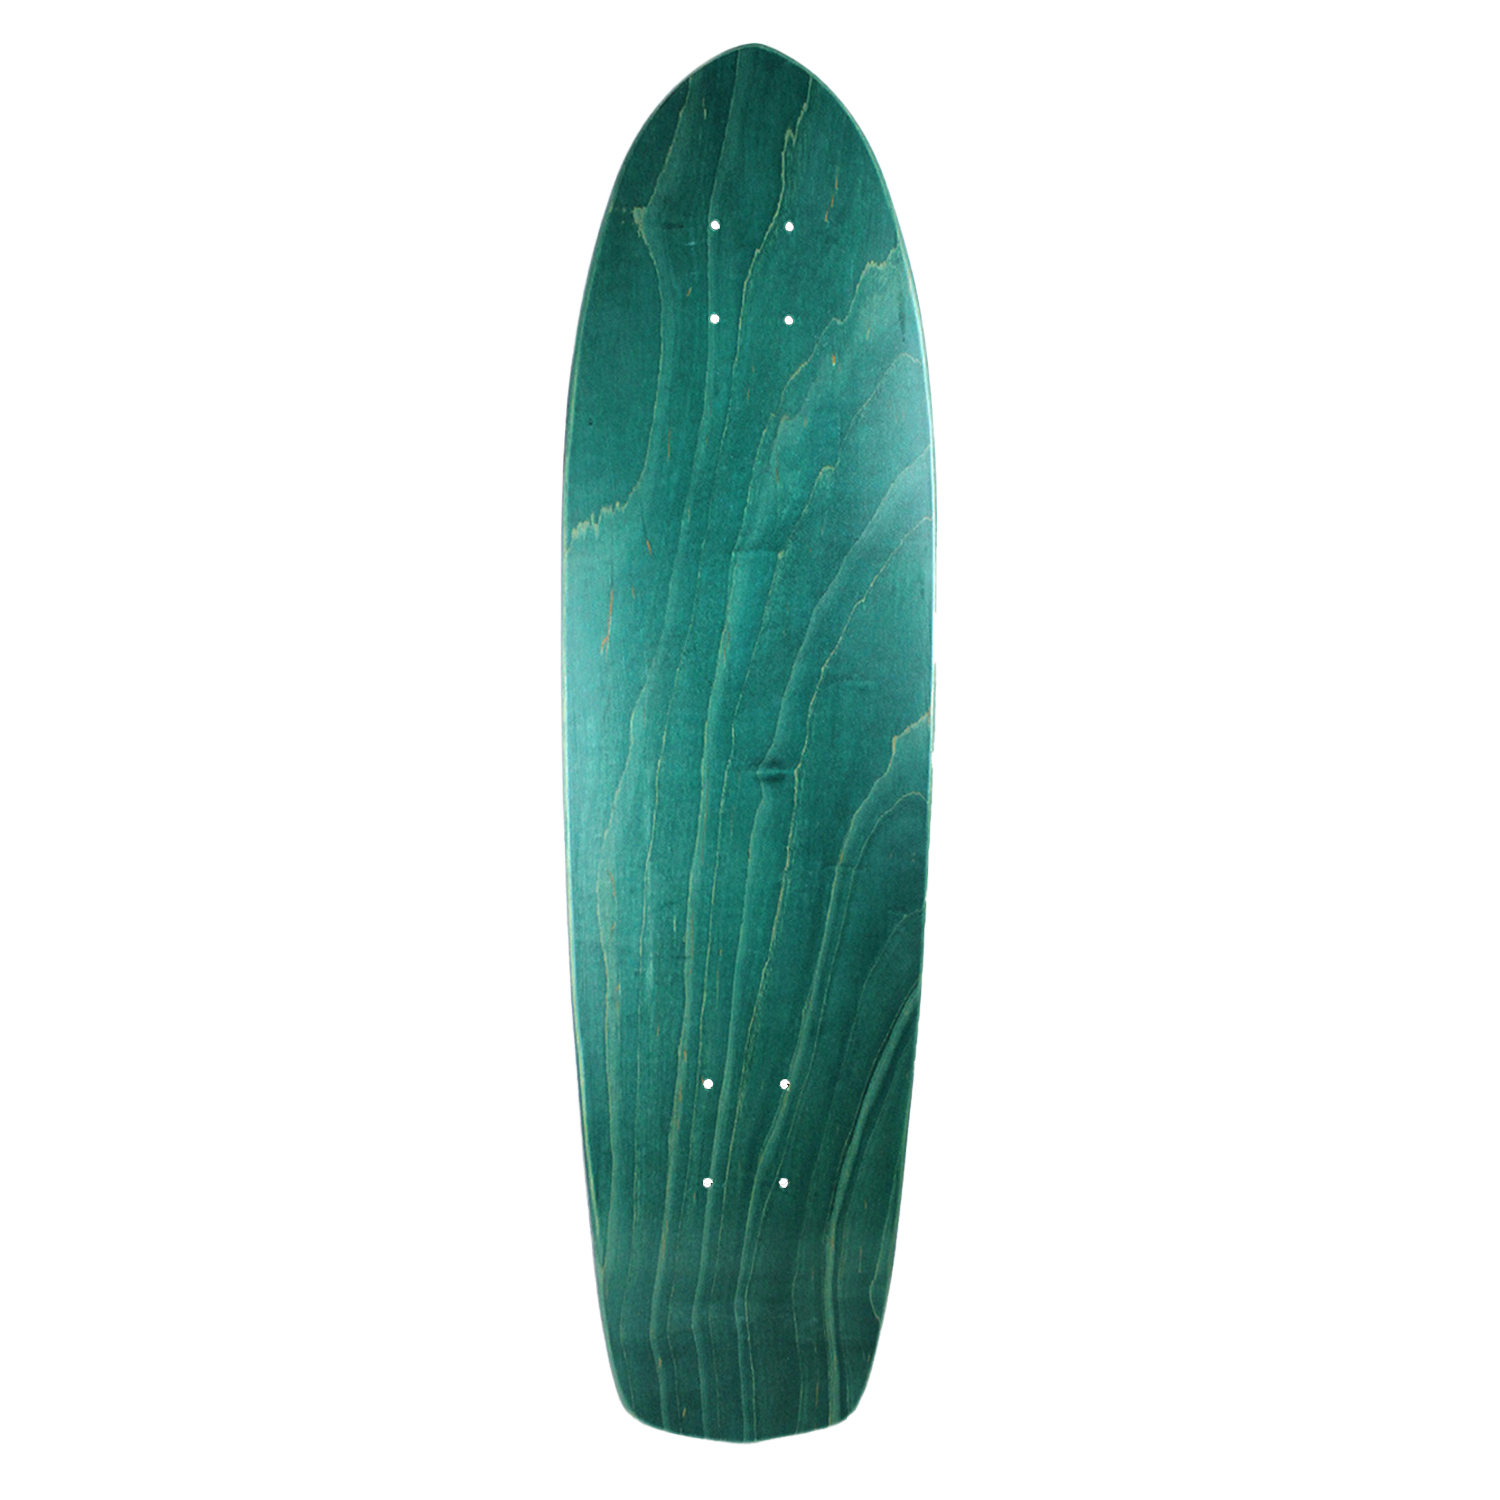 Moose Skateboard Cruiser Deck 7 Ply North American Maple Stain Teal 8.25in x 31in